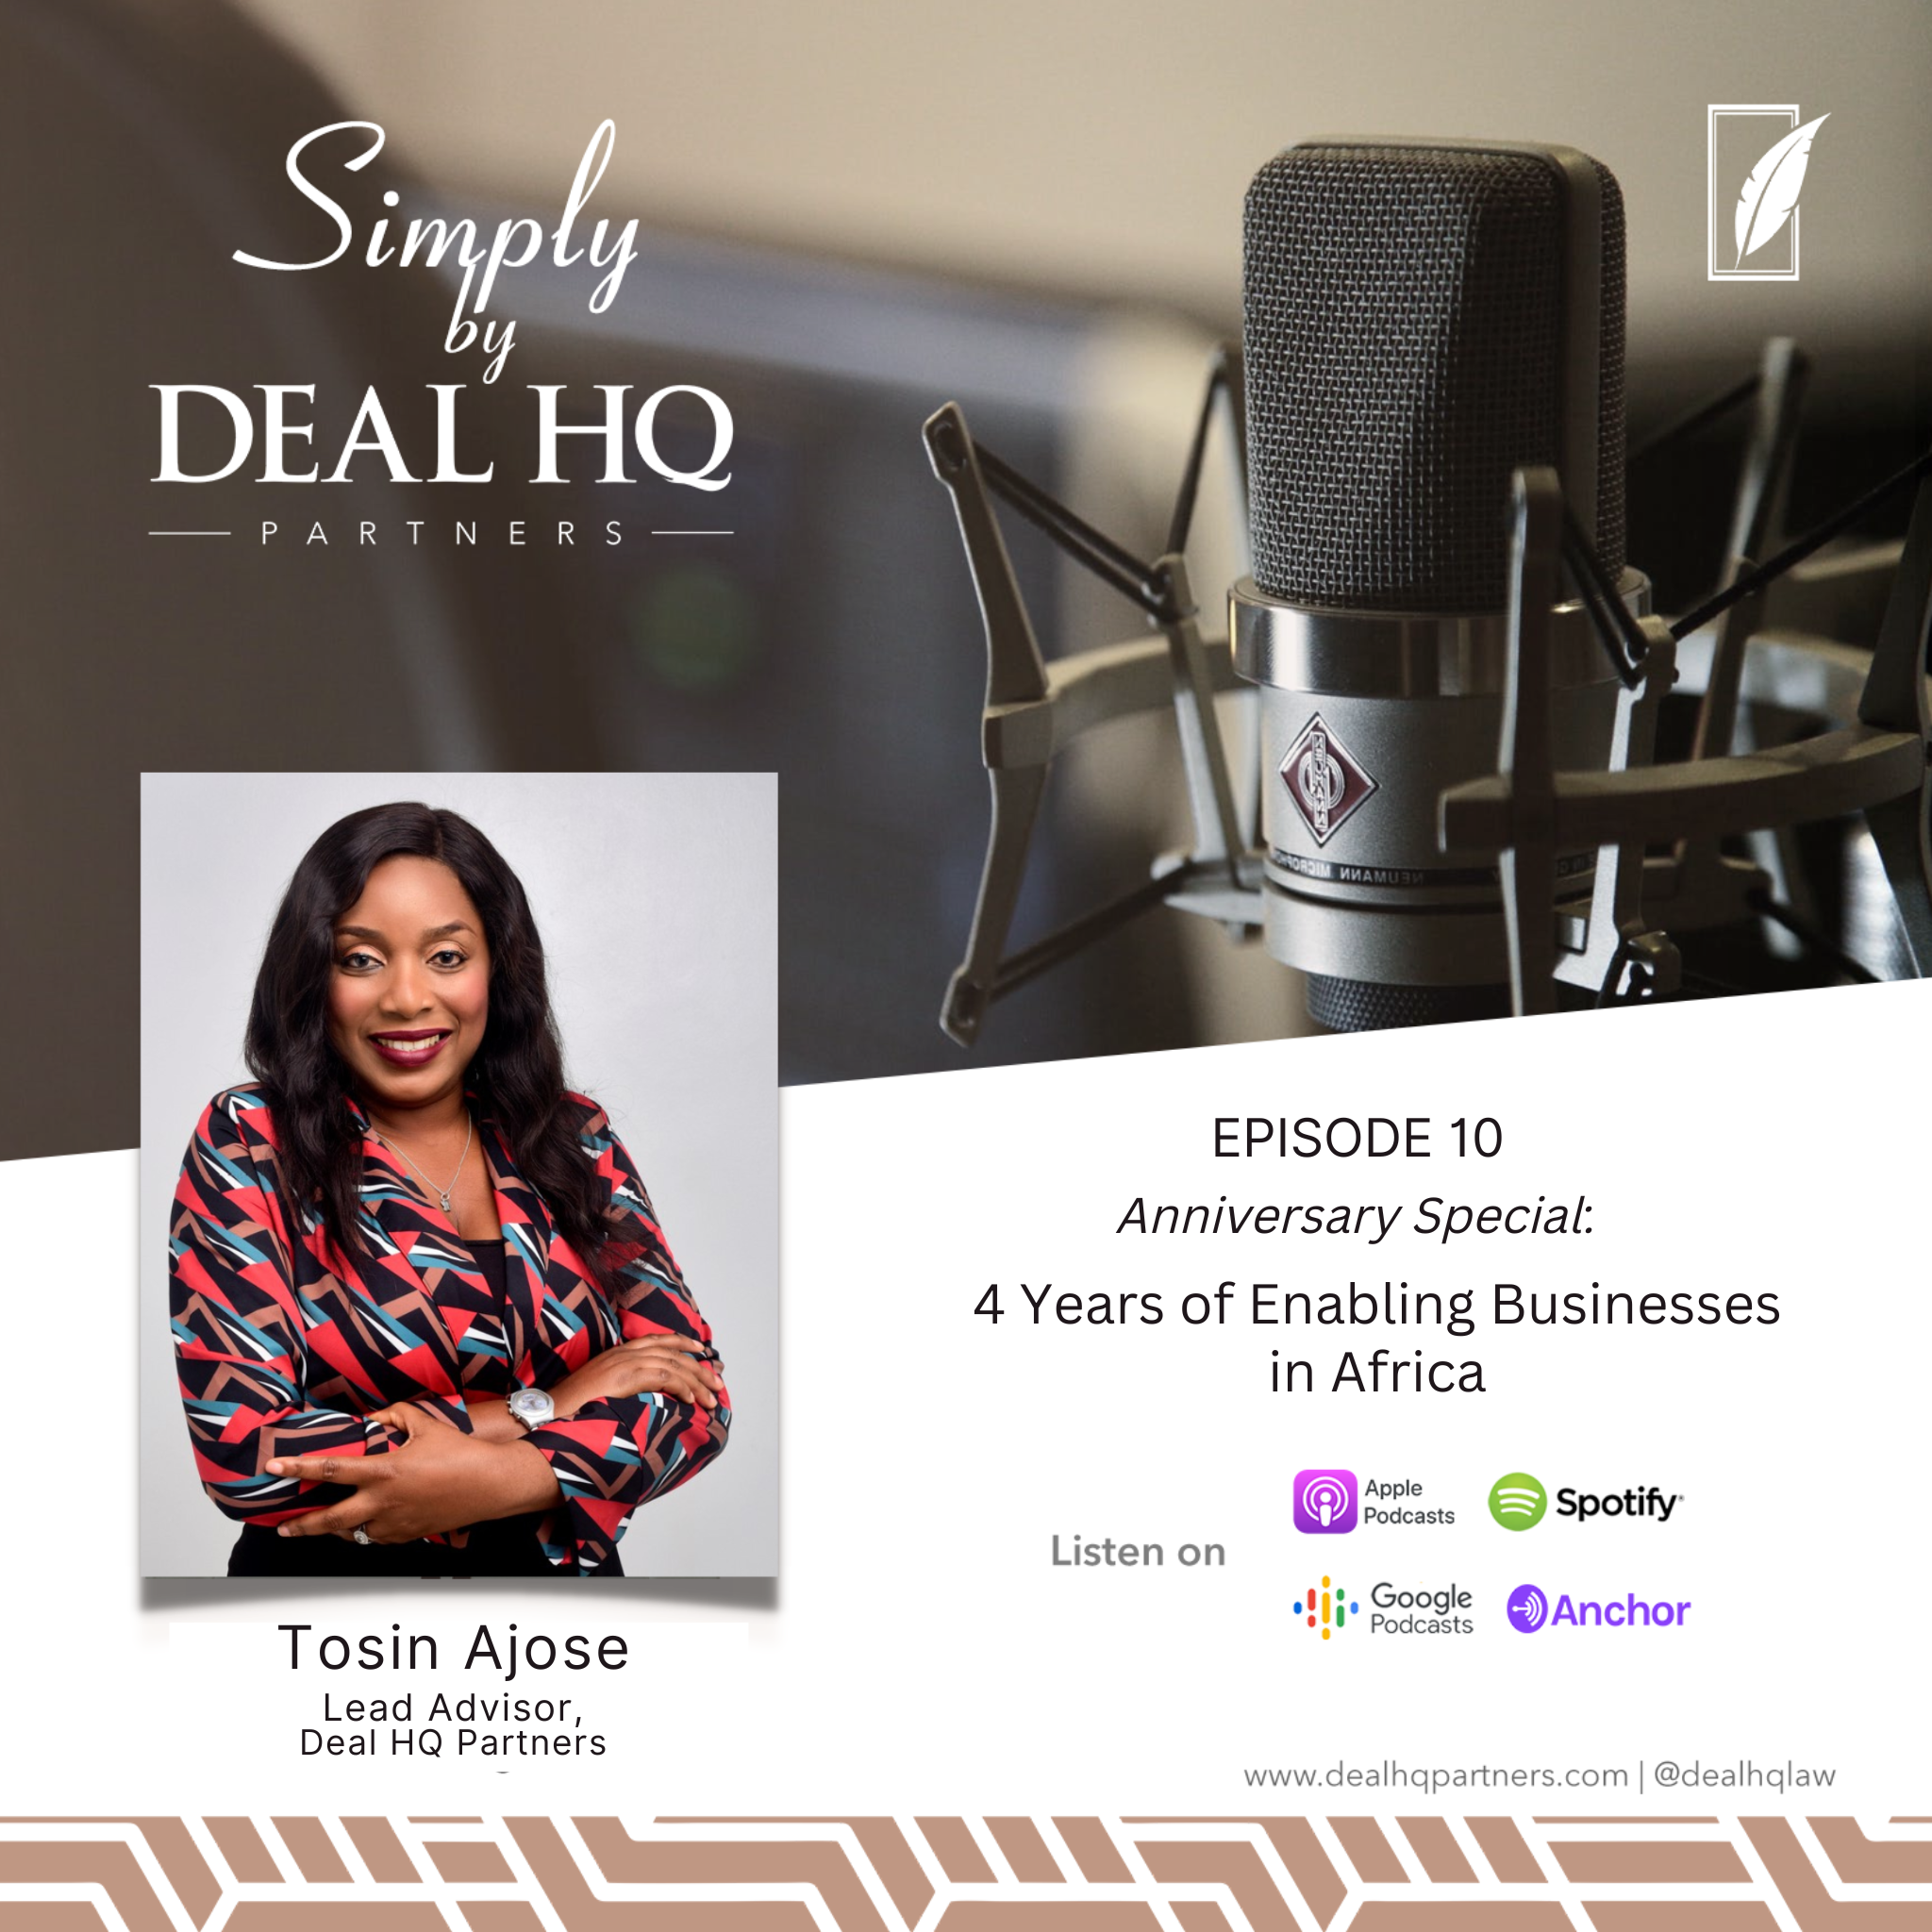 Season 1 Episode 10 – Anniversary Special: DealHQ Partners 4 years of enabling Businesses in Africa